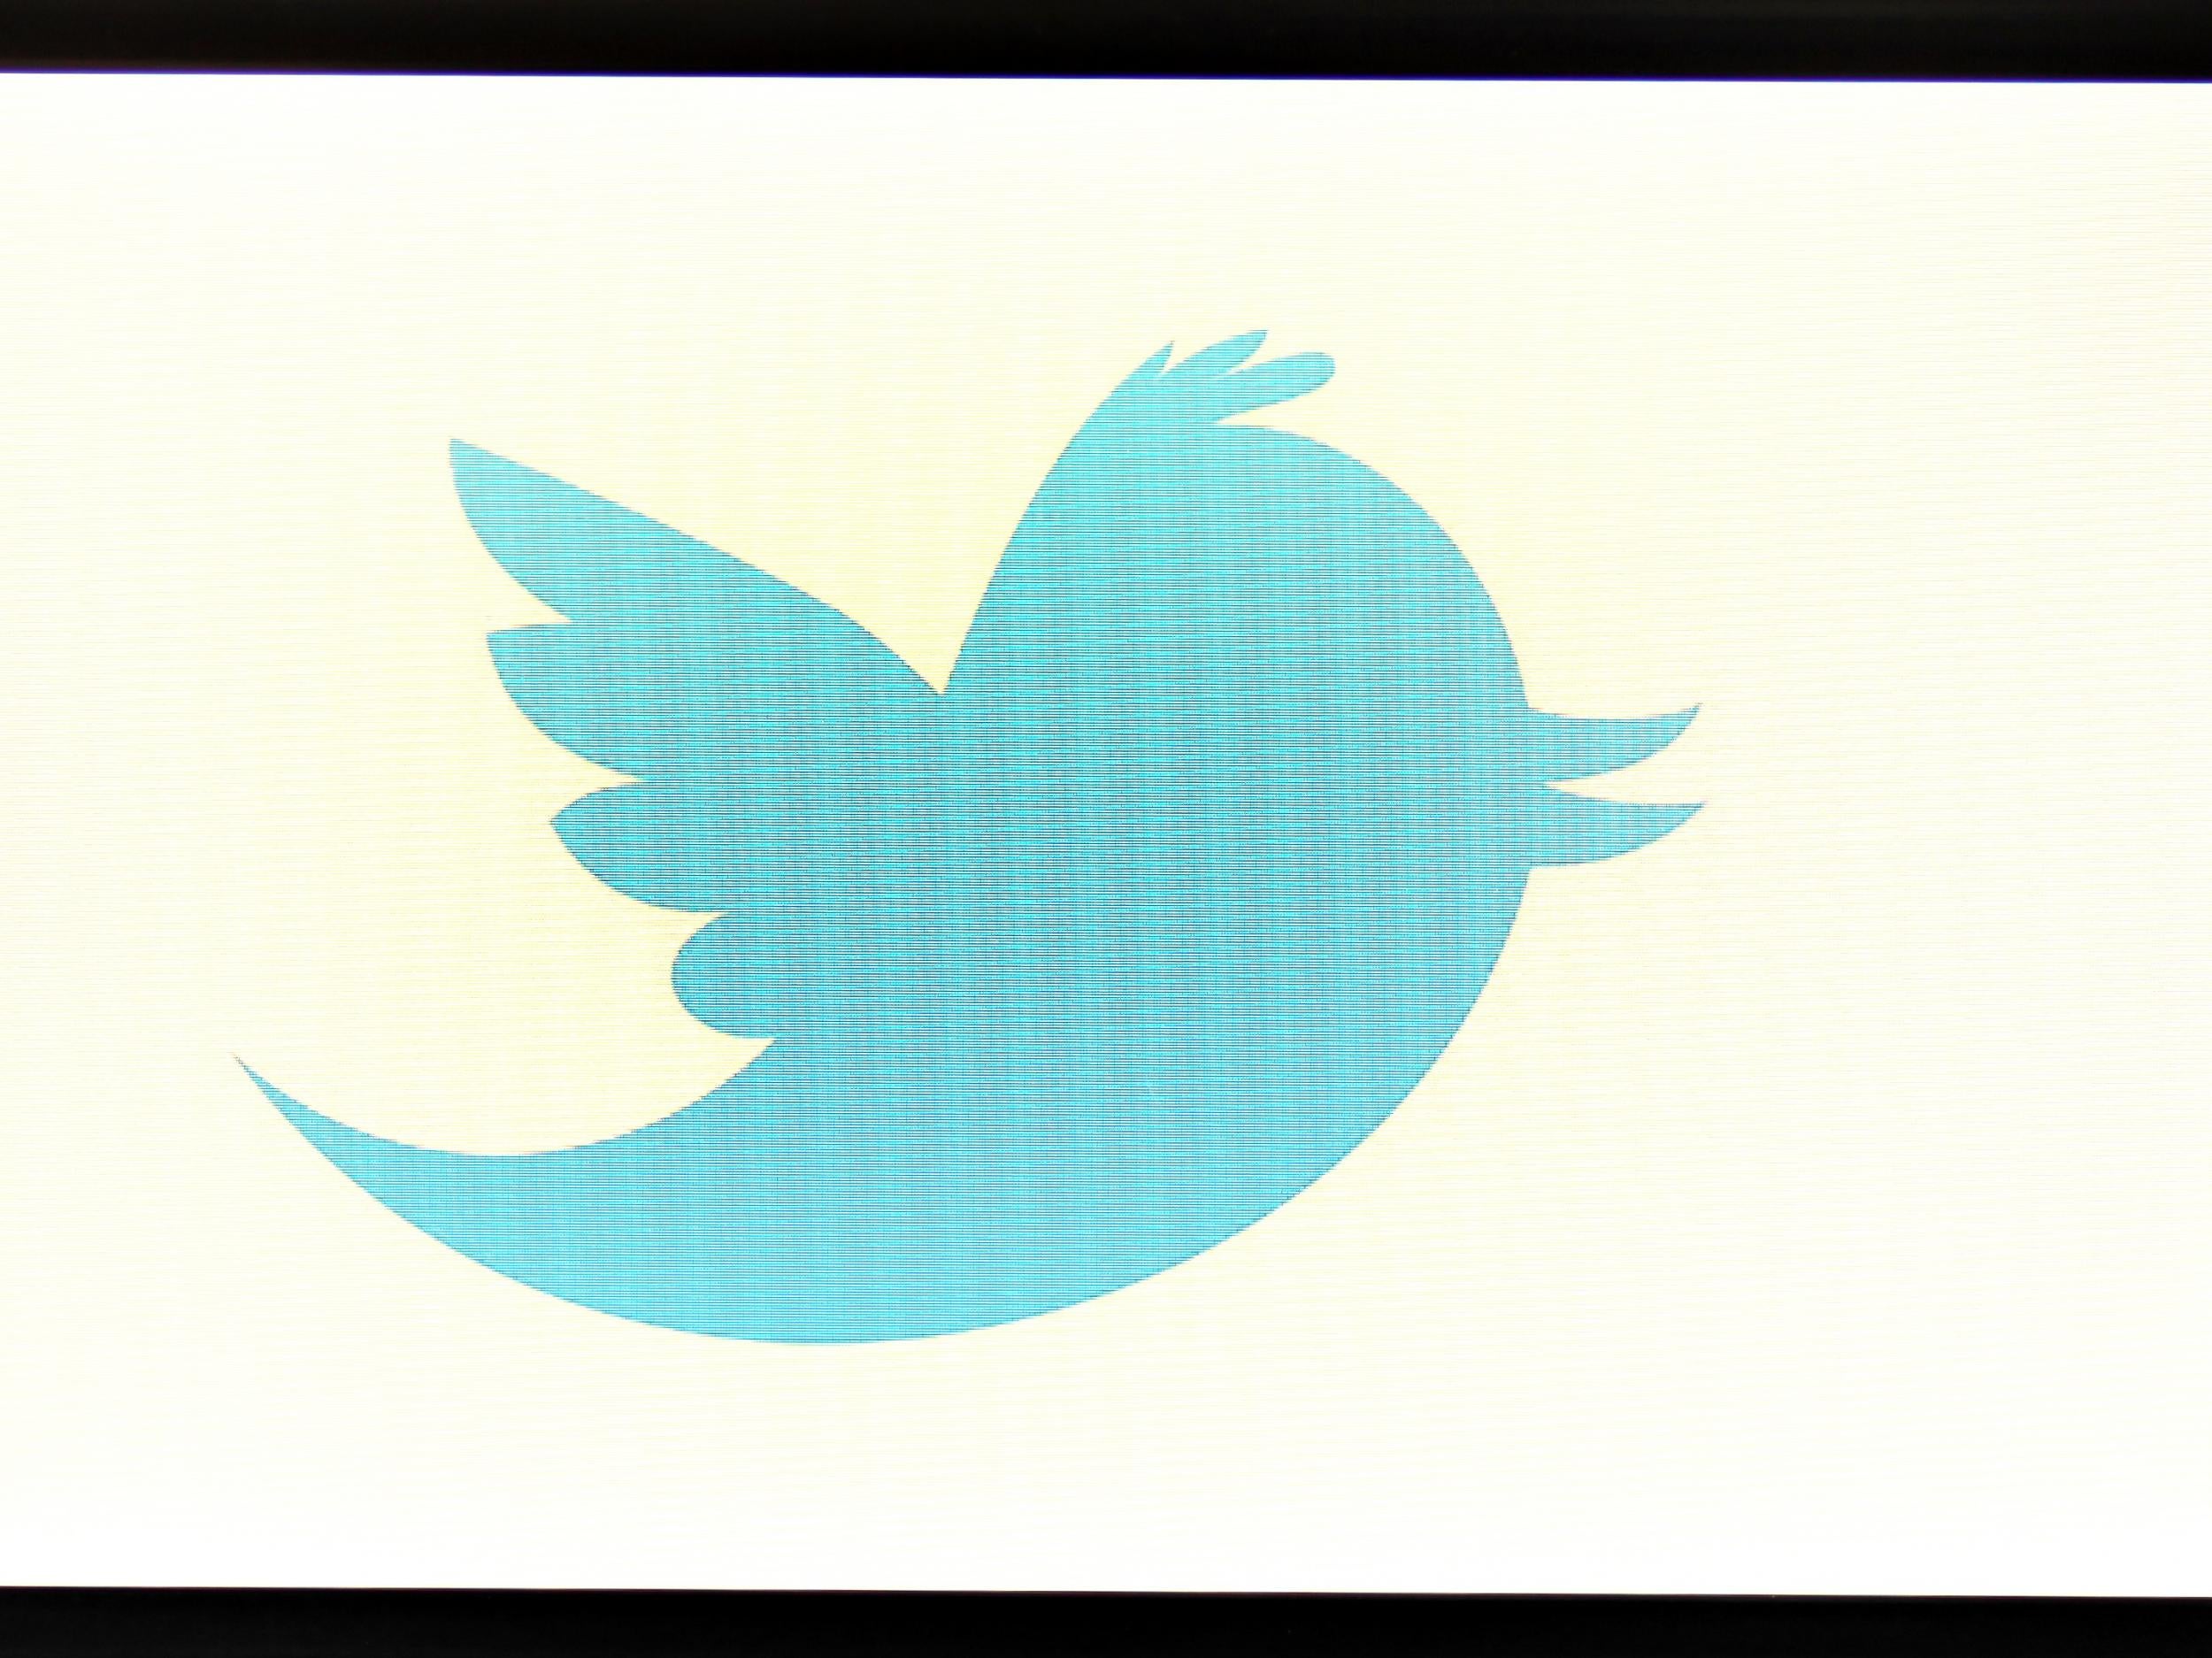 There have been calls for an edit tweet feature since long before Twitter edited its own logo in 2012